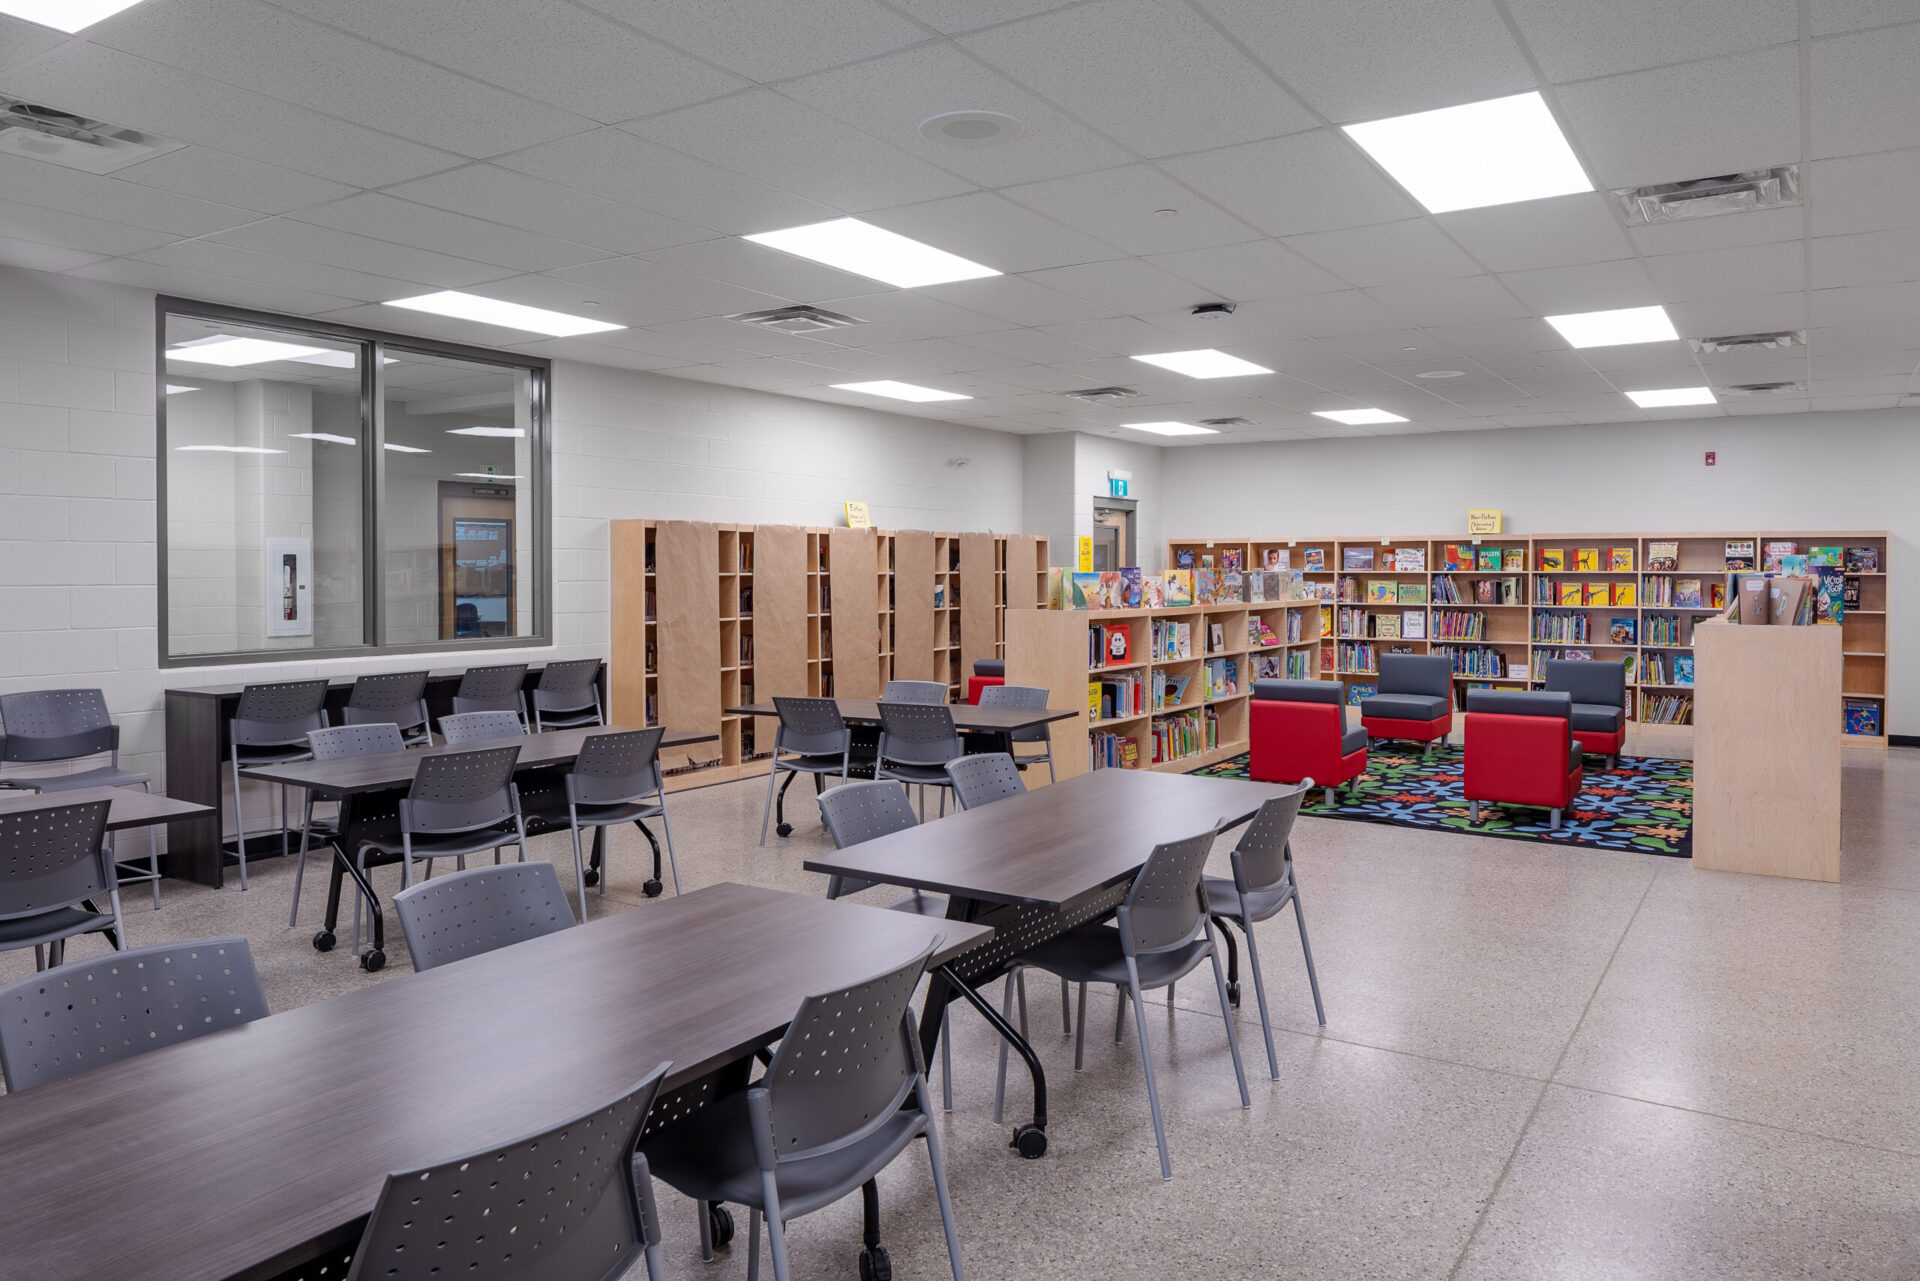 A school library with tables, chairs, and an architecture-inspired layout.